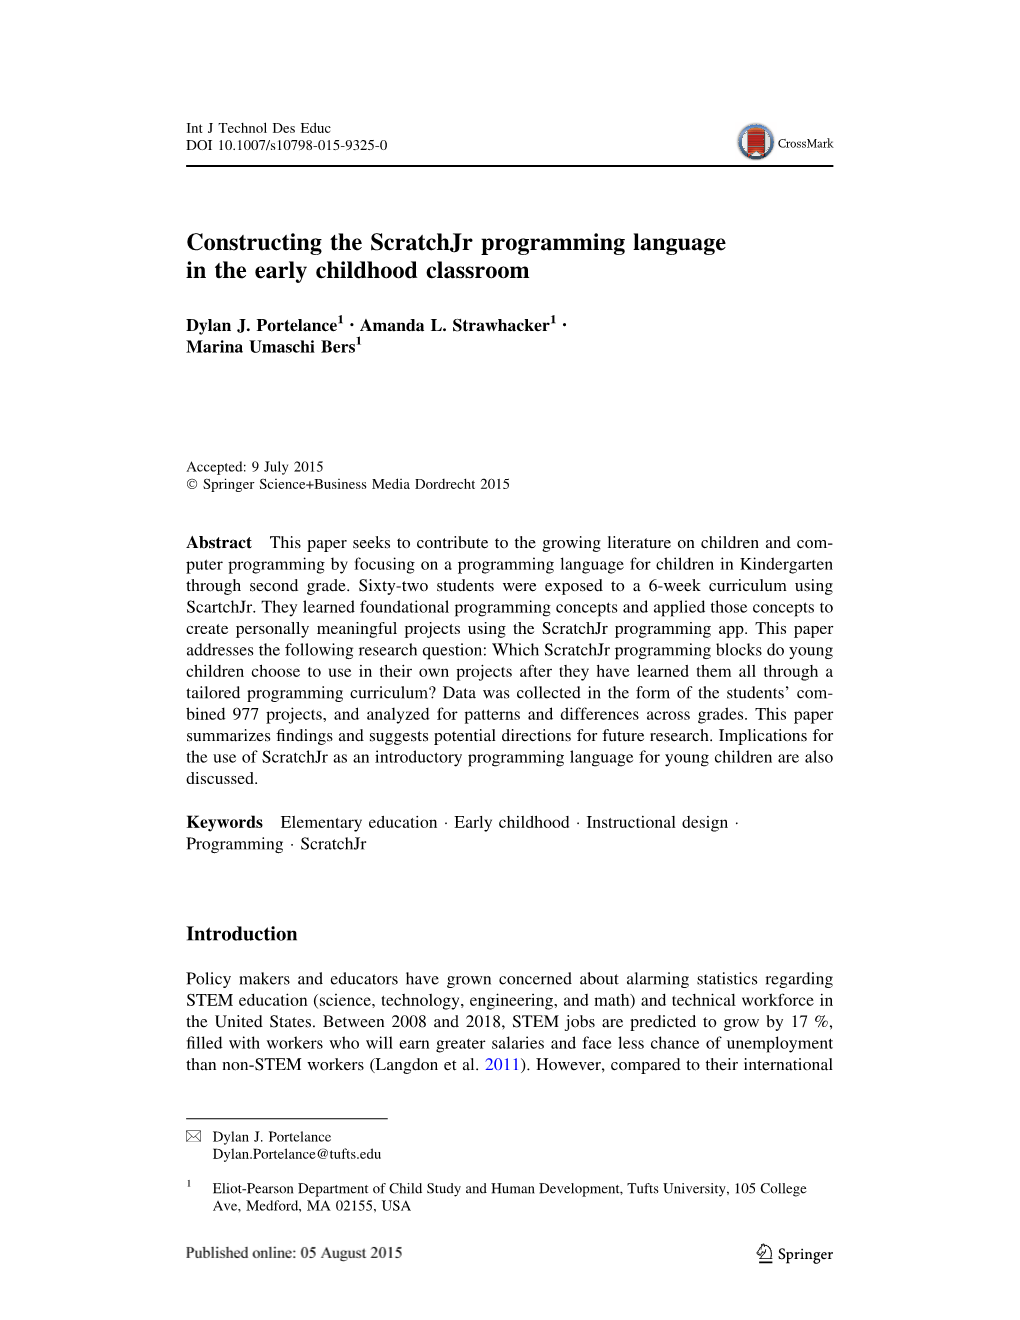 Constructing the Scratchjr Programming Language in the Early Childhood Classroom